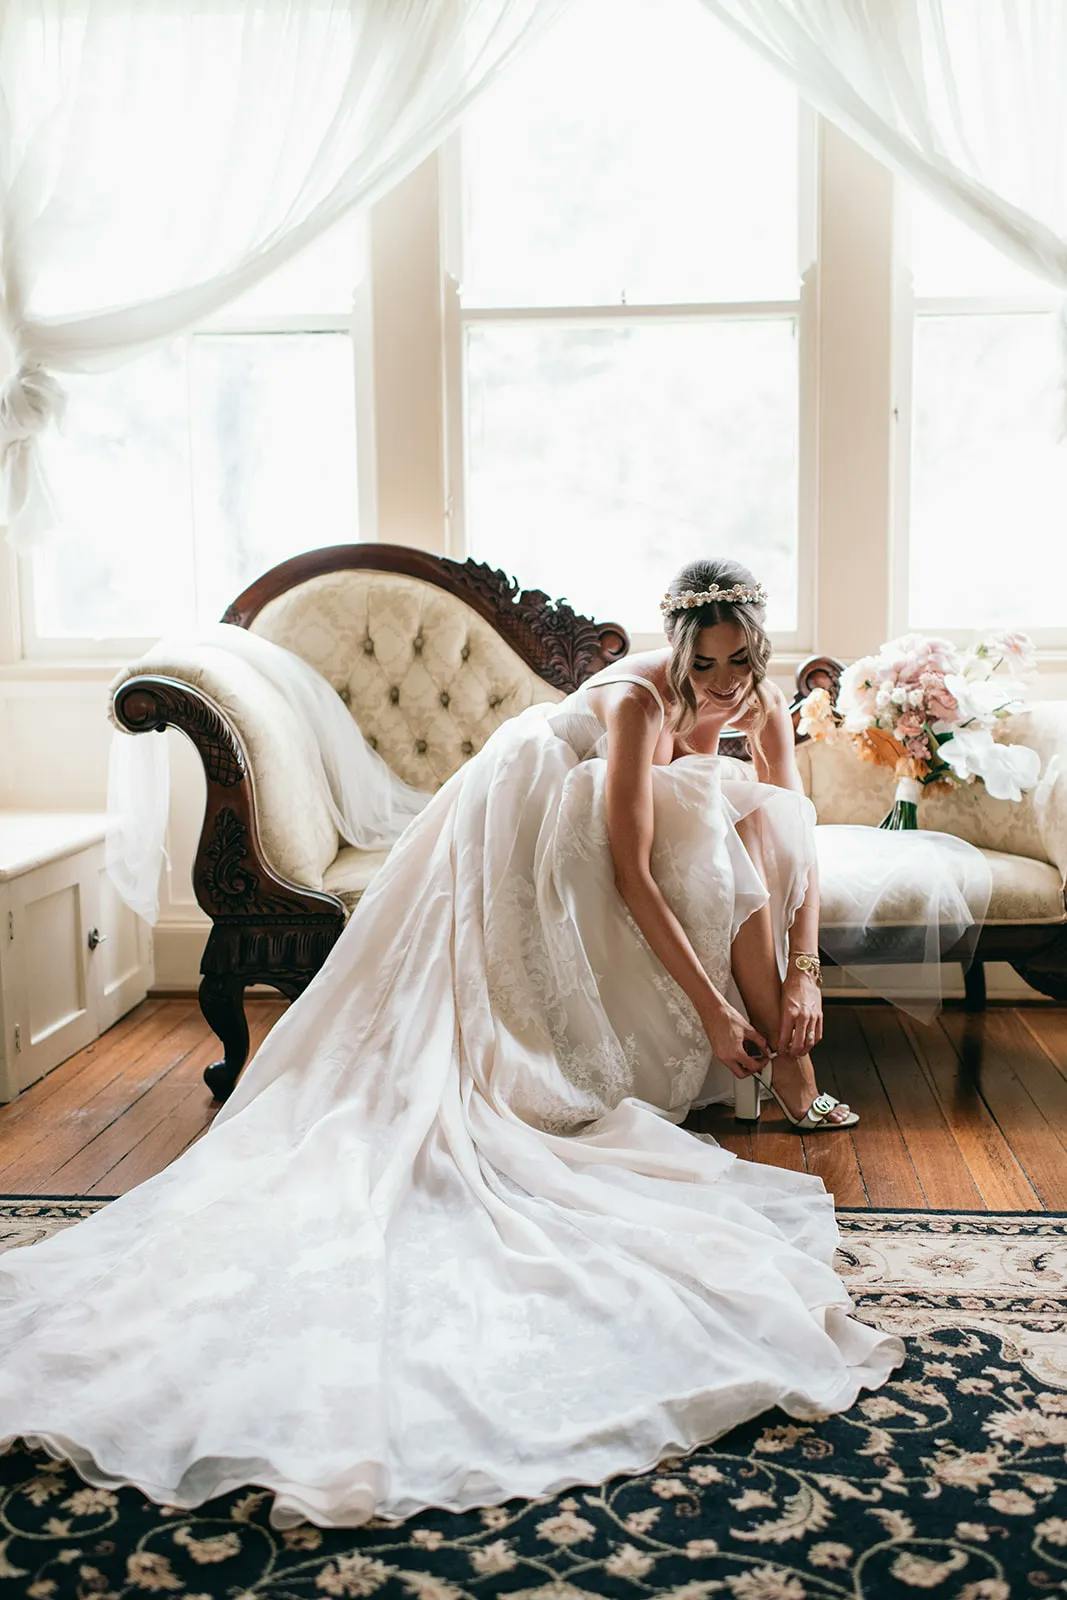 A bride in a white wedding dress sits on an elegant vintage sofa in a sunlit room with large windows. She adjusts her shoe, with a bouquet of flowers beside her on the sofa. The dress flows onto the wooden floor, and sheer curtains adorn the windows.